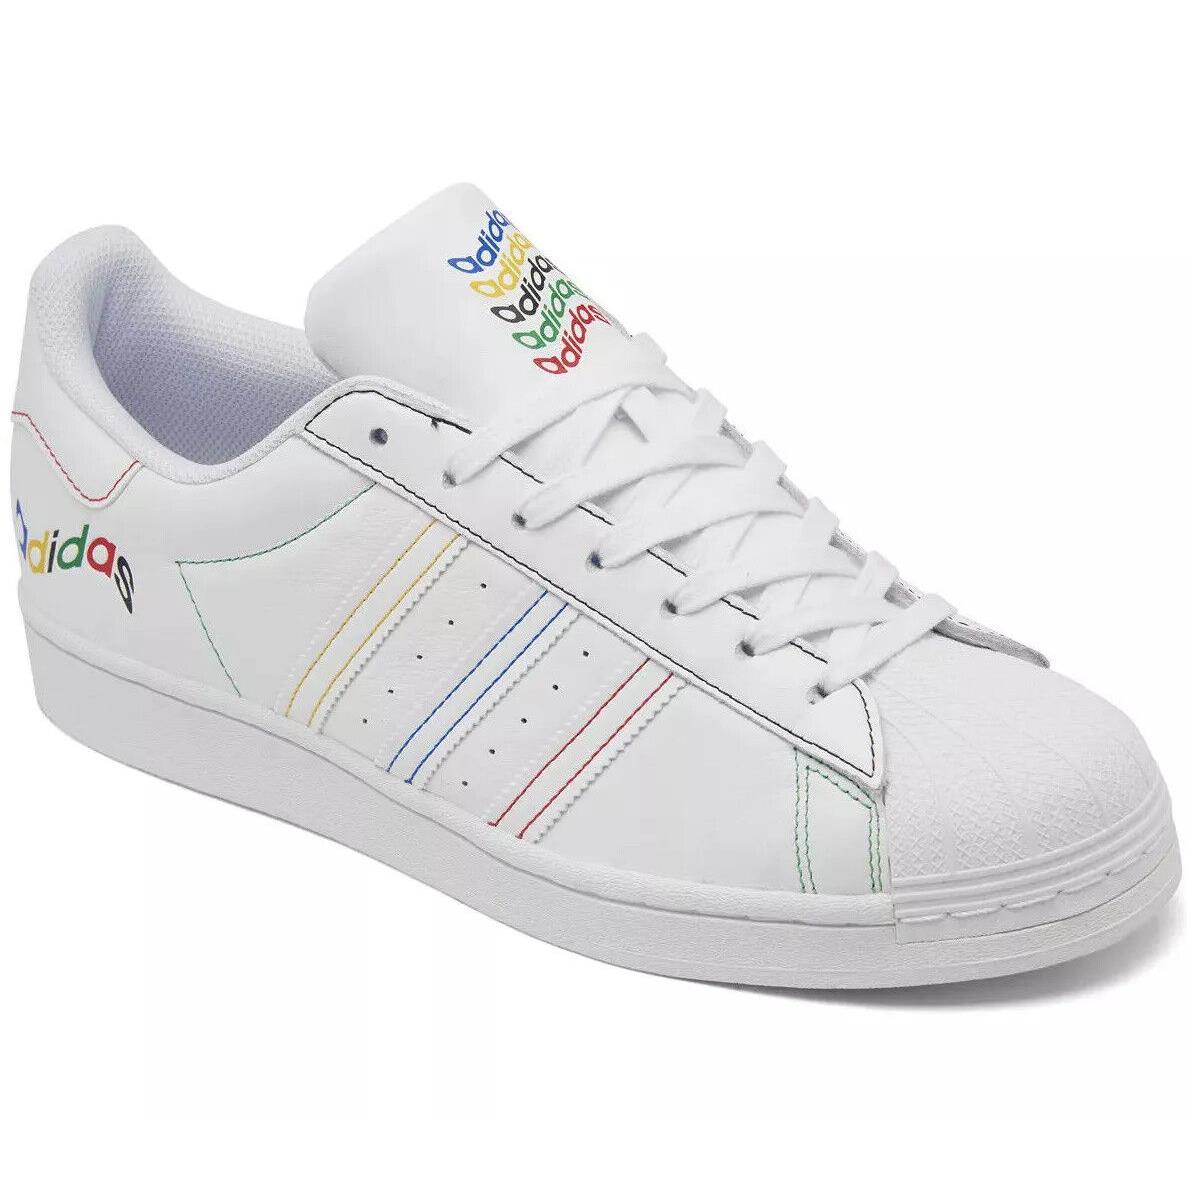 Adidas Superstar Vegan GY8066 Men`s Casual Sneakers Classic Shoes White Size 14